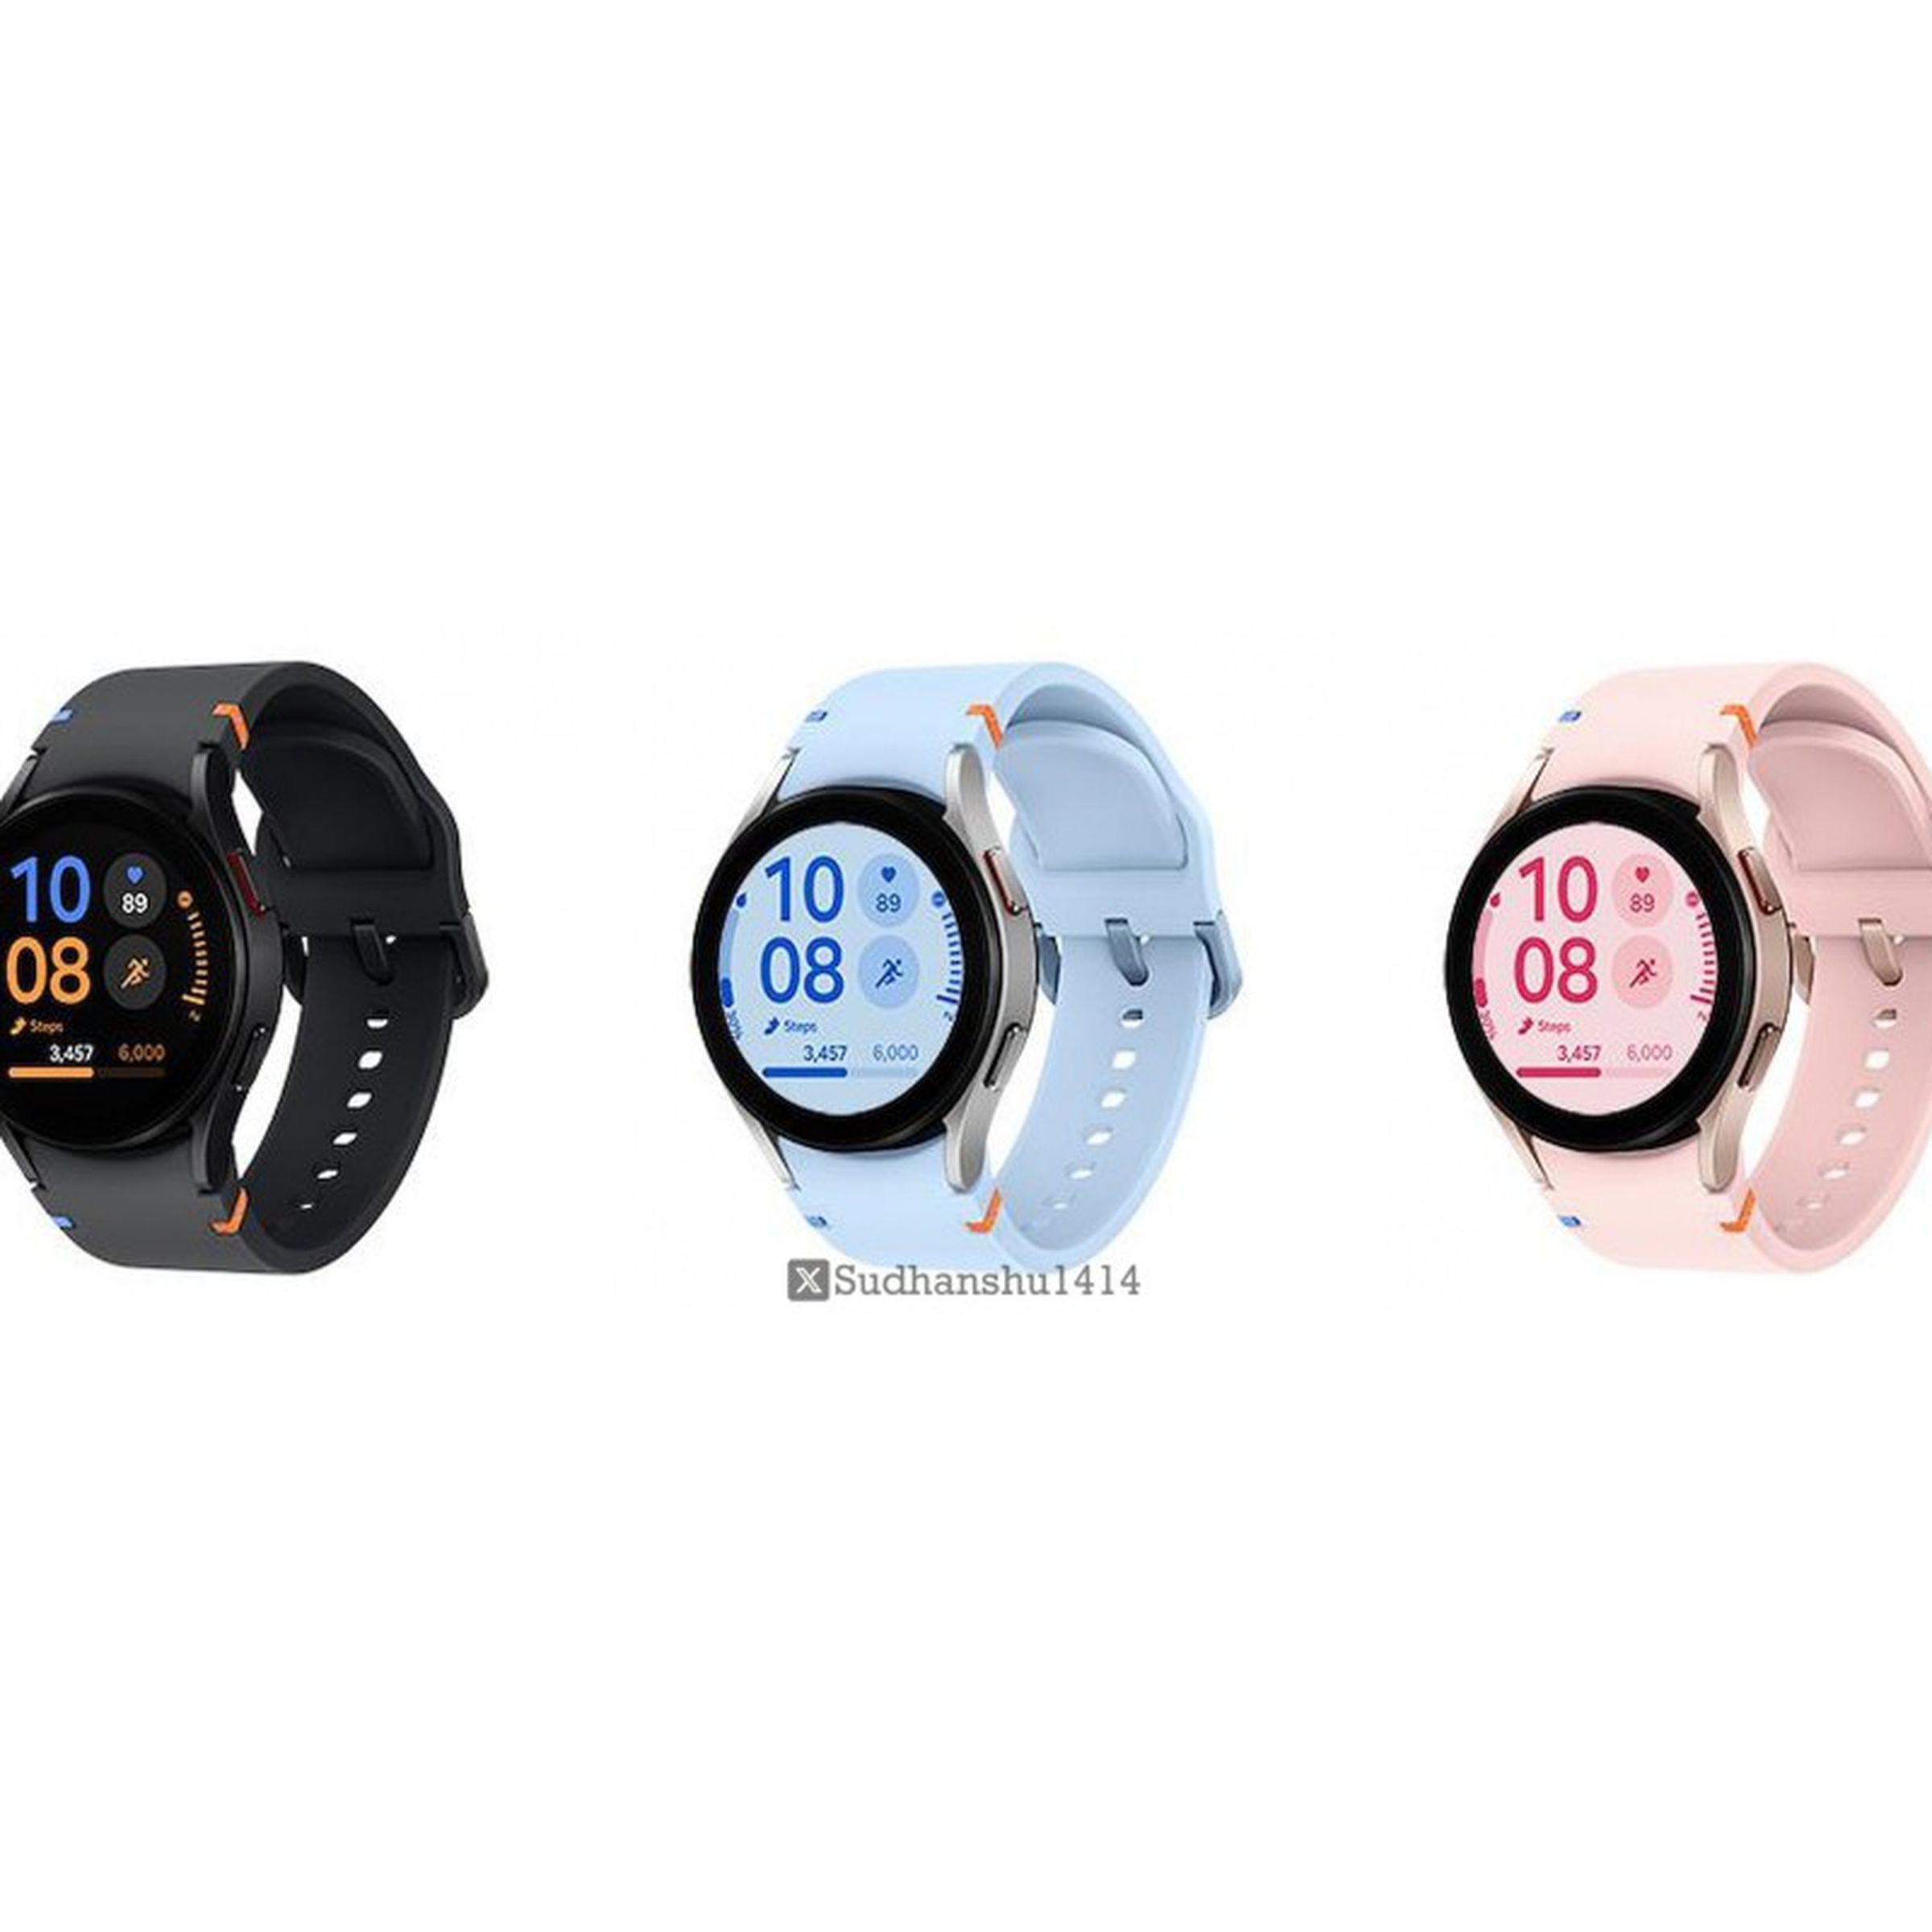 A leaked image showing what appears to be the Samsung Galaxy Watch FE in black, blue, and pink